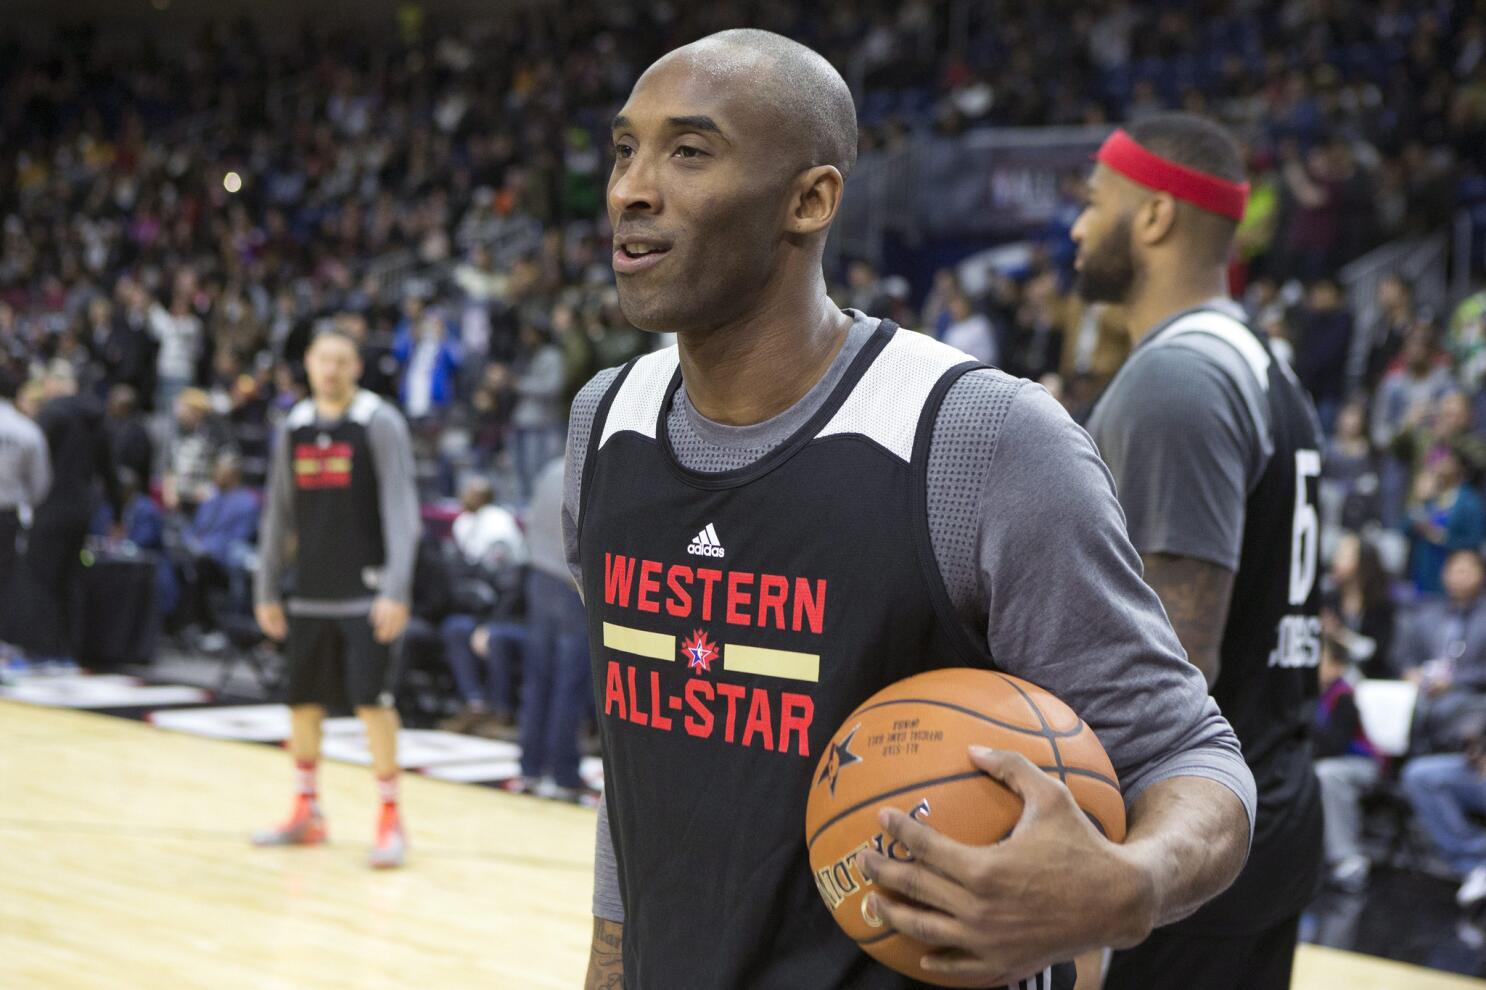 NBA All-Star Game 2016 jerseys: Canada-inspired uniforms a good